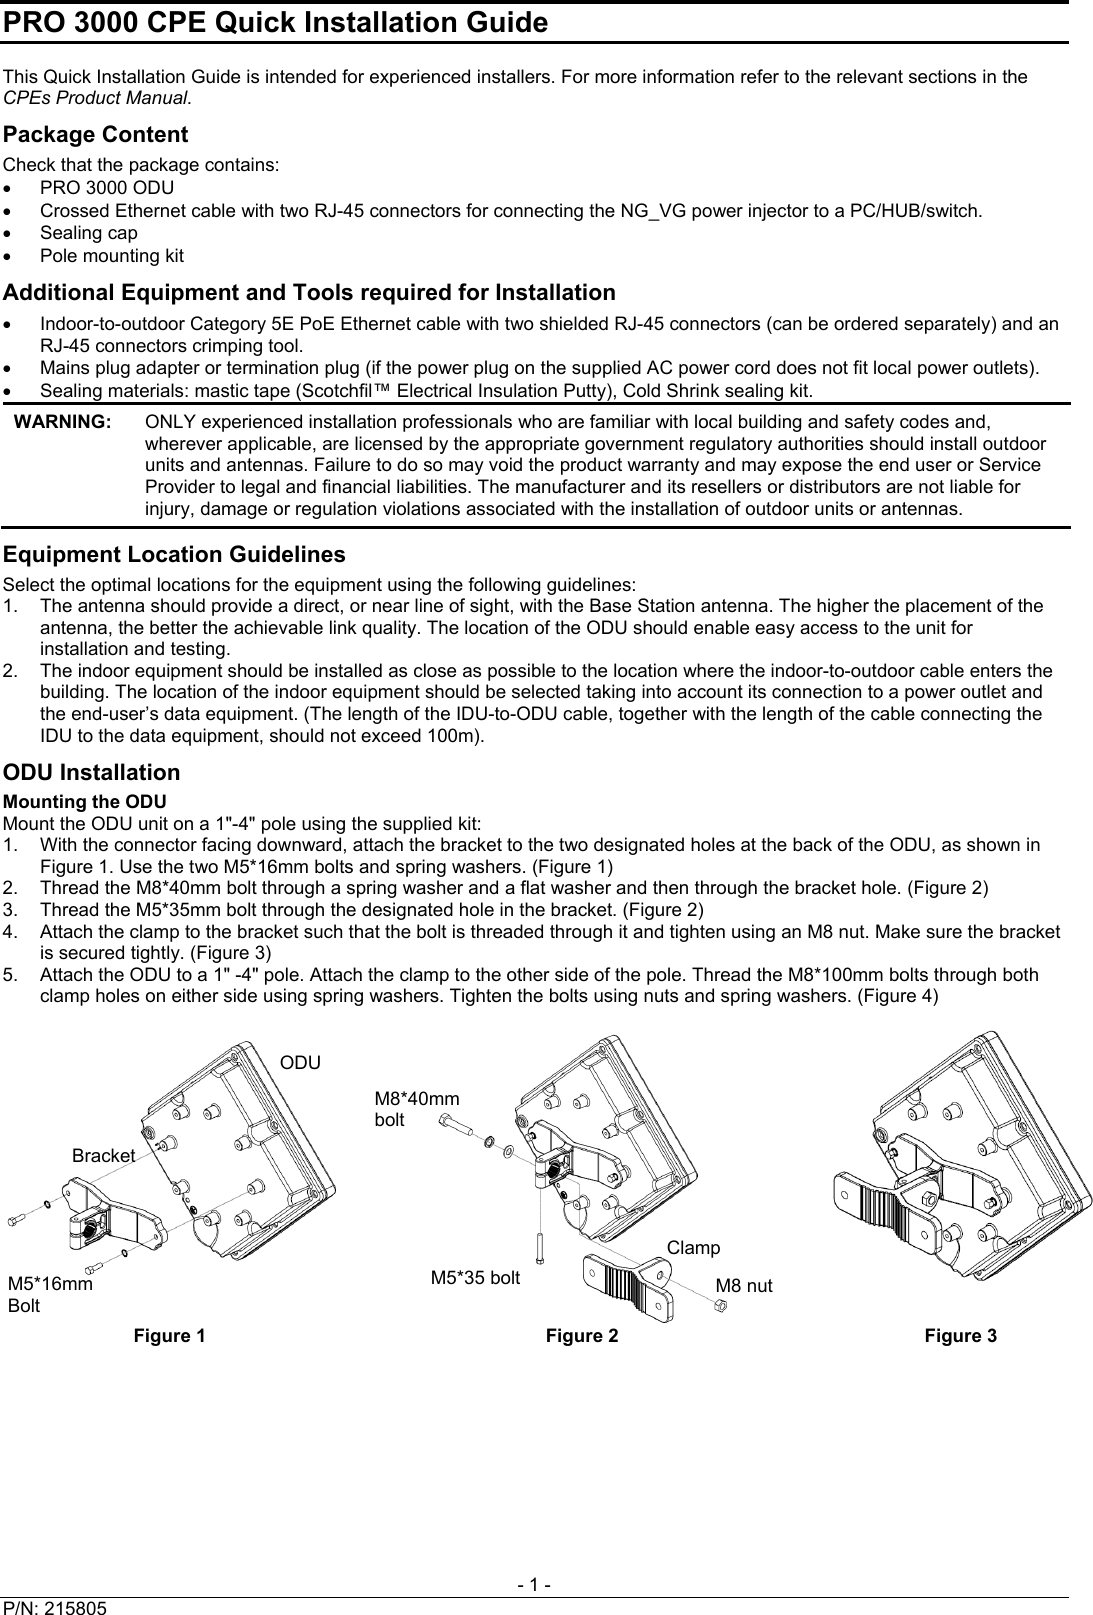 PRO 3000 CPE Quick Installation Guide  - 1 - This Quick Installation Guide is intended for experienced installers. For more information refer to the relevant sections in the CPEs Product Manual. Package Content Check that the package contains:   PRO 3000 ODU   Crossed Ethernet cable with two RJ-45 connectors for connecting the NG_VG power injector to a PC/HUB/switch.  Sealing cap  Pole mounting kit Additional Equipment and Tools required for Installation   Indoor-to-outdoor Category 5E PoE Ethernet cable with two shielded RJ-45 connectors (can be ordered separately) and an RJ-45 connectors crimping tool.   Mains plug adapter or termination plug (if the power plug on the supplied AC power cord does not fit local power outlets).   Sealing materials: mastic tape (Scotchfil™ Electrical Insulation Putty), Cold Shrink sealing kit.  WARNING:   ONLY experienced installation professionals who are familiar with local building and safety codes and, wherever applicable, are licensed by the appropriate government regulatory authorities should install outdoor units and antennas. Failure to do so may void the product warranty and may expose the end user or Service Provider to legal and financial liabilities. The manufacturer and its resellers or distributors are not liable for injury, damage or regulation violations associated with the installation of outdoor units or antennas. Equipment Location Guidelines Select the optimal locations for the equipment using the following guidelines: 1.  The antenna should provide a direct, or near line of sight, with the Base Station antenna. The higher the placement of the antenna, the better the achievable link quality. The location of the ODU should enable easy access to the unit for installation and testing.  2.  The indoor equipment should be installed as close as possible to the location where the indoor-to-outdoor cable enters the building. The location of the indoor equipment should be selected taking into account its connection to a power outlet and the end-user’s data equipment. (The length of the IDU-to-ODU cable, together with the length of the cable connecting the IDU to the data equipment, should not exceed 100m). ODU Installation Mounting the ODU Mount the ODU unit on a 1&quot;-4&quot; pole using the supplied kit: 1.  With the connector facing downward, attach the bracket to the two designated holes at the back of the ODU, as shown in Figure 1. Use the two M5*16mm bolts and spring washers. (Figure 1) 2.  Thread the M8*40mm bolt through a spring washer and a flat washer and then through the bracket hole. (Figure 2) 3.  Thread the M5*35mm bolt through the designated hole in the bracket. (Figure 2) 4.  Attach the clamp to the bracket such that the bolt is threaded through it and tighten using an M8 nut. Make sure the bracket is secured tightly. (Figure 3) 5.  Attach the ODU to a 1&quot; -4&quot; pole. Attach the clamp to the other side of the pole. Thread the M8*100mm bolts through both clamp holes on either side using spring washers. Tighten the bolts using nuts and spring washers. (Figure 4)     Figure 1  Figure 2  Figure 3 ODU M8*40mm boltBracket Clamp M5*35 bolt M5*16mm Bolt M8 nut P/N: 215805   